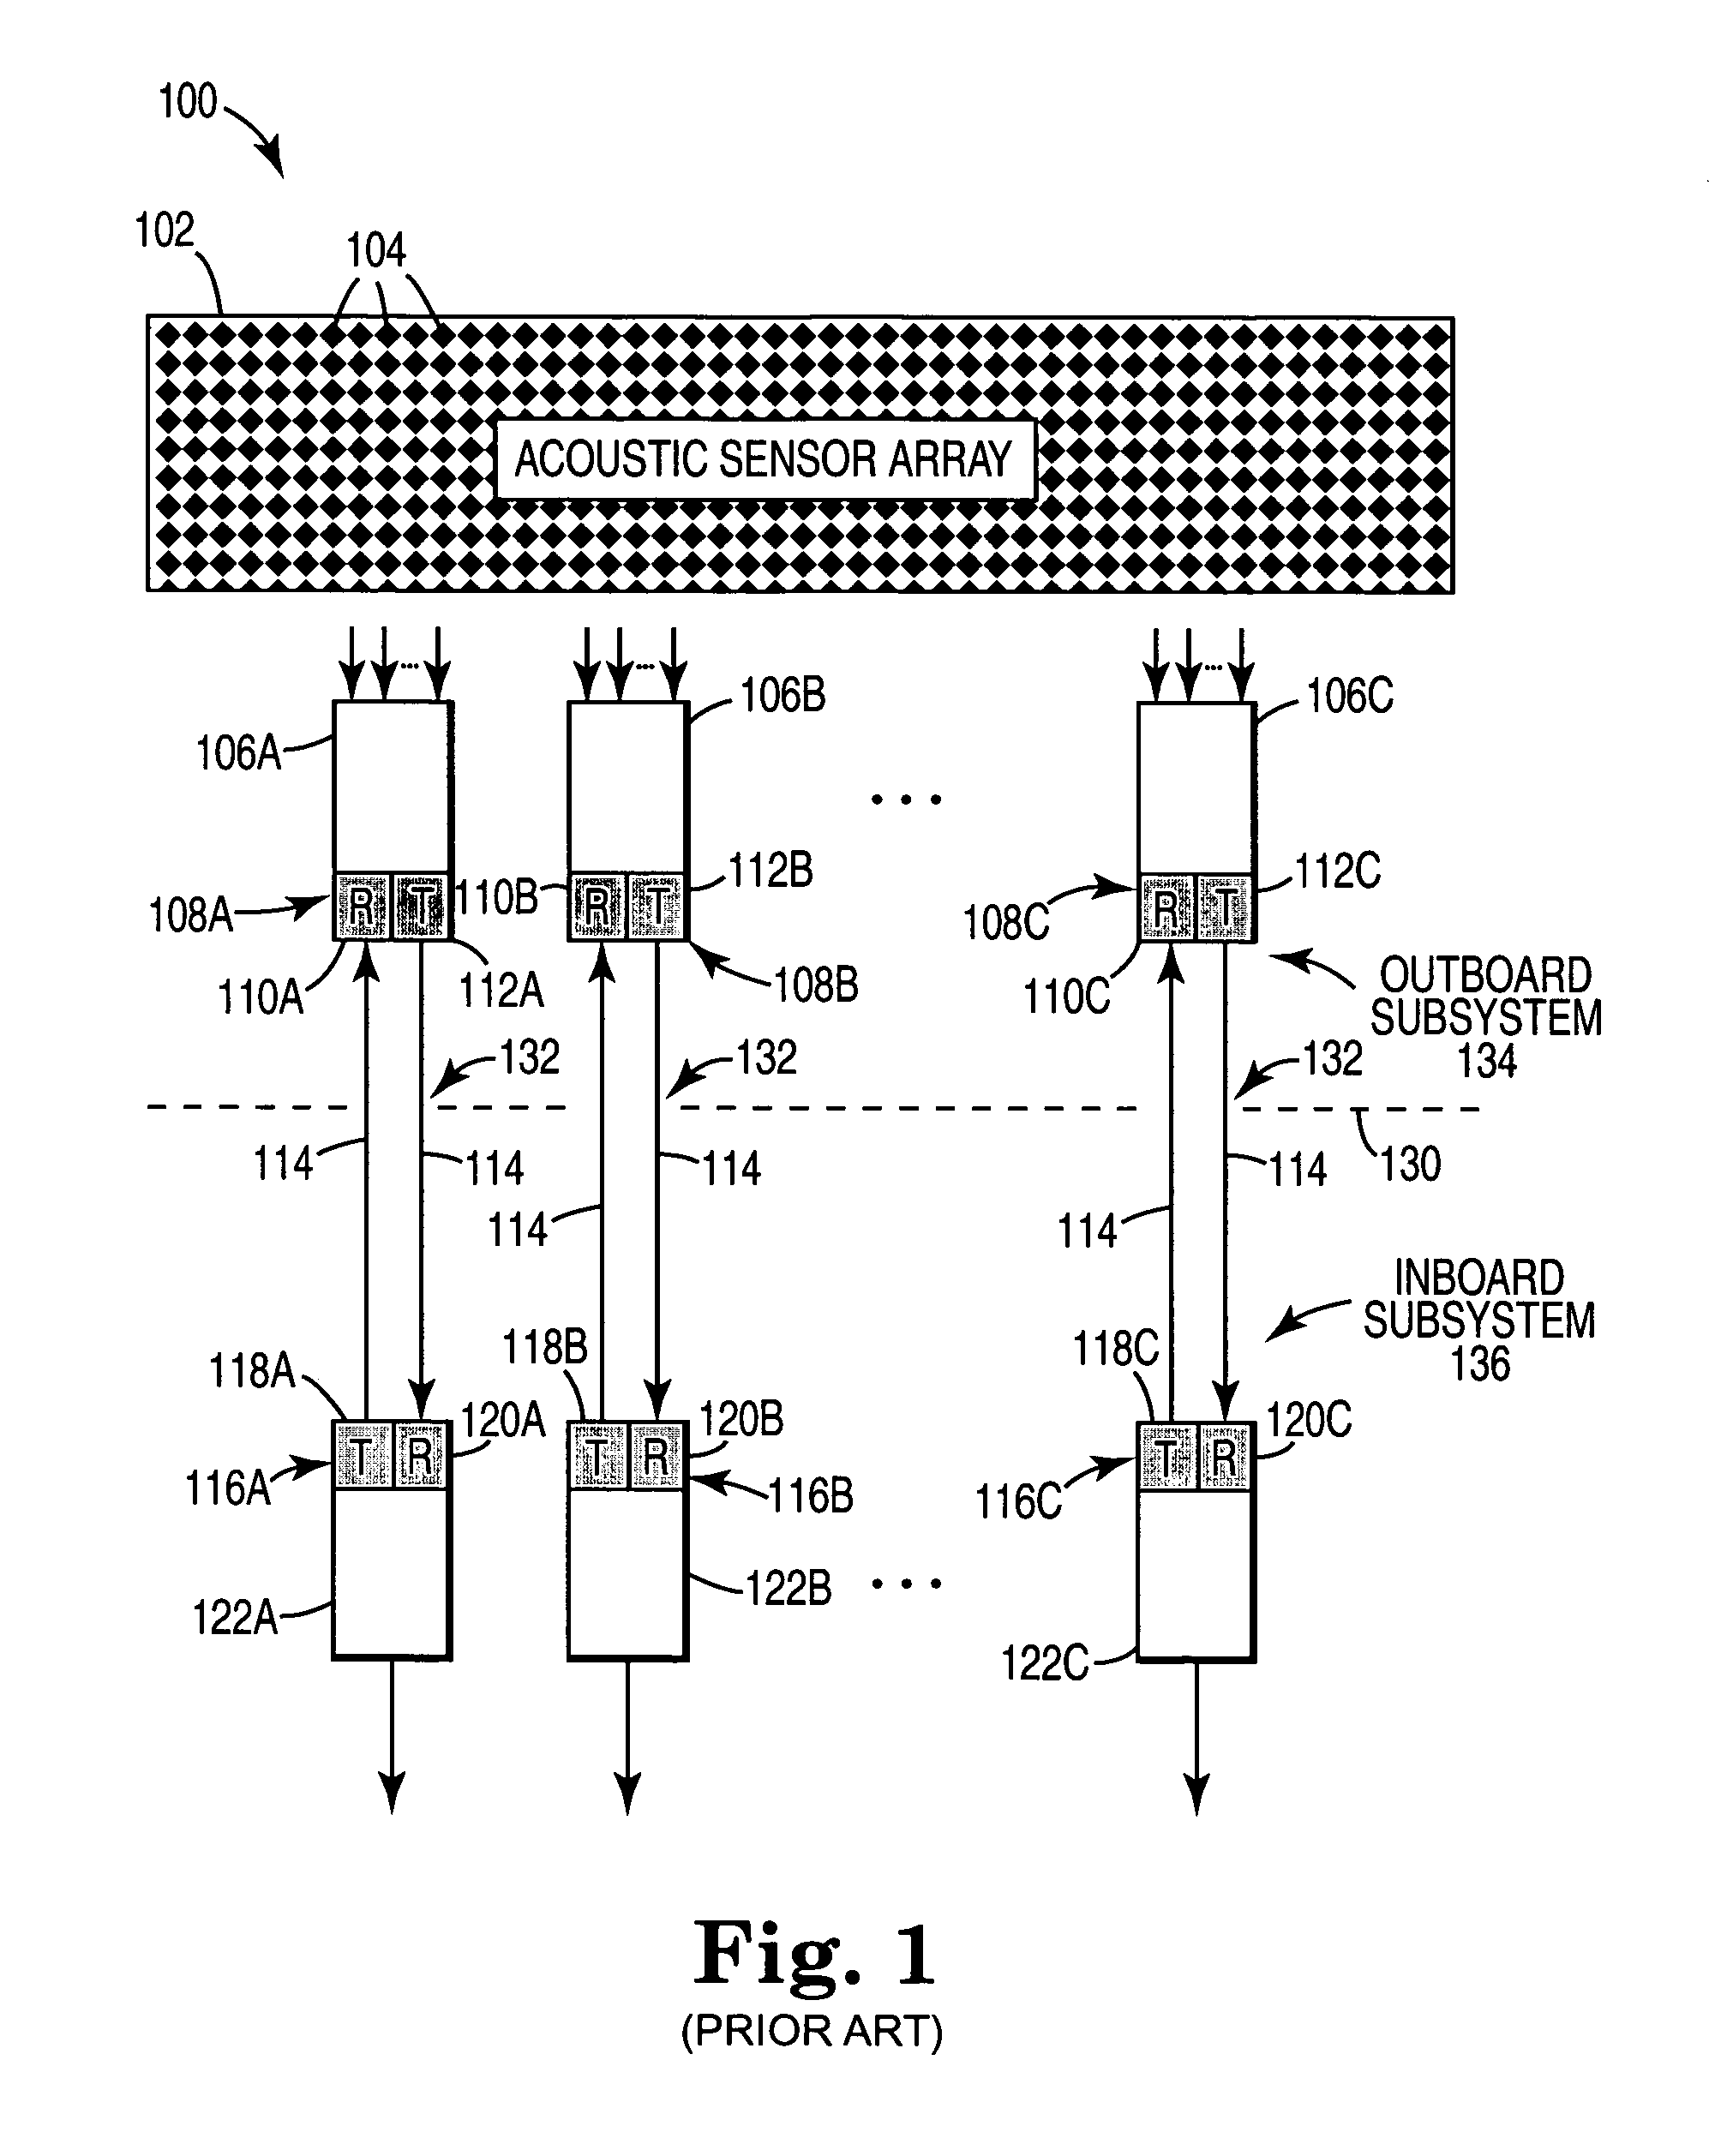 Telemetry system and method for acoustic arrays